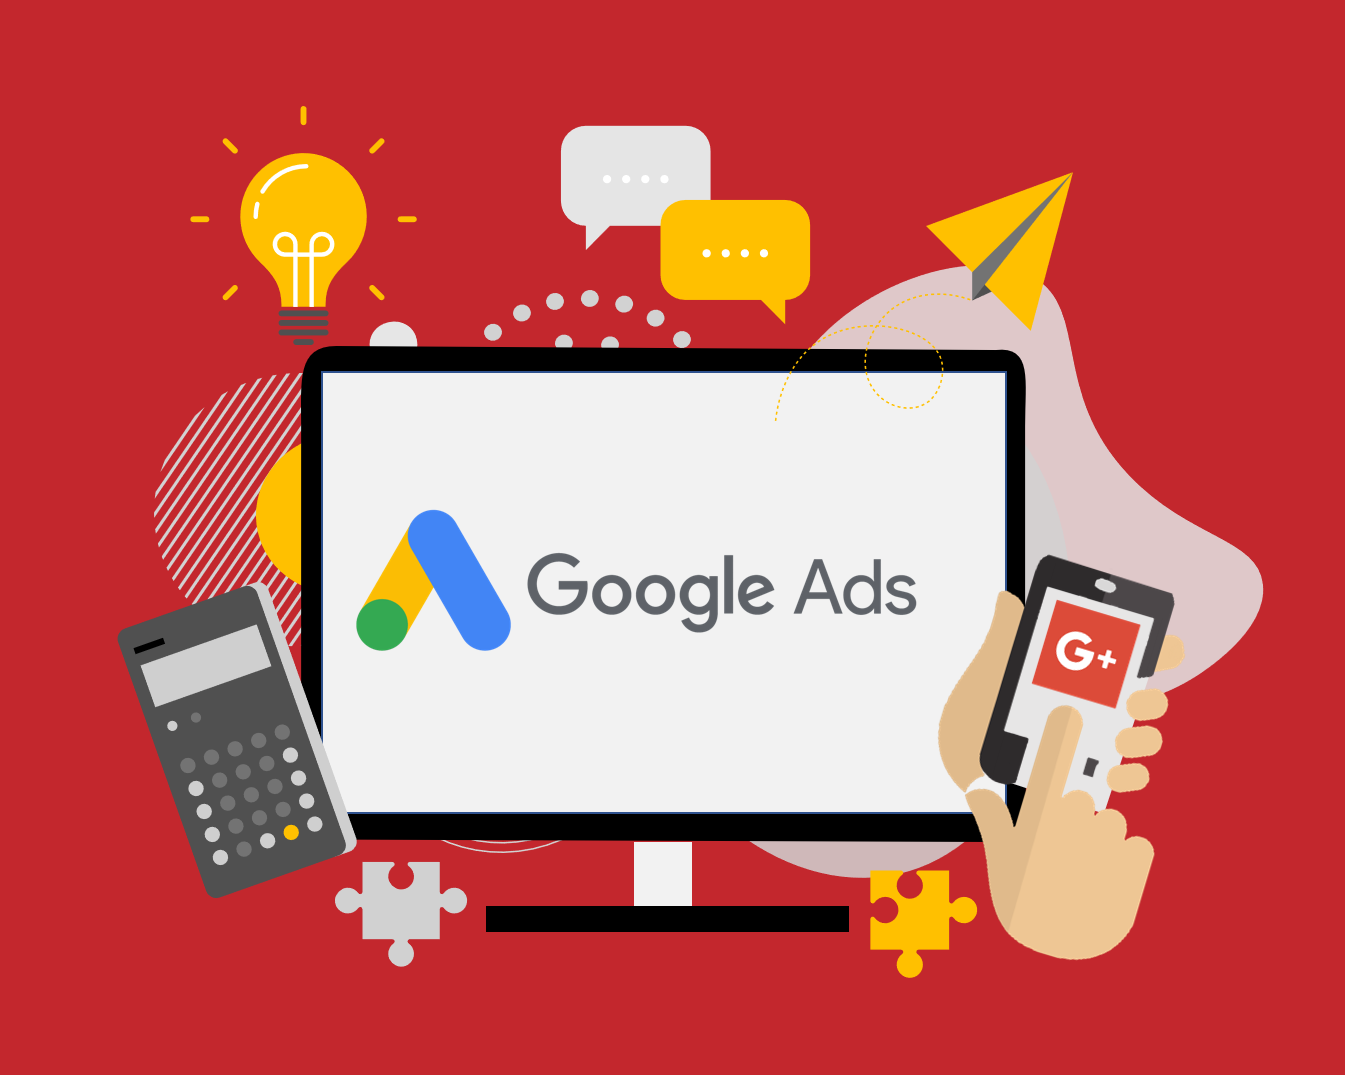 How Much Does Google Ads Cost in Singapore?